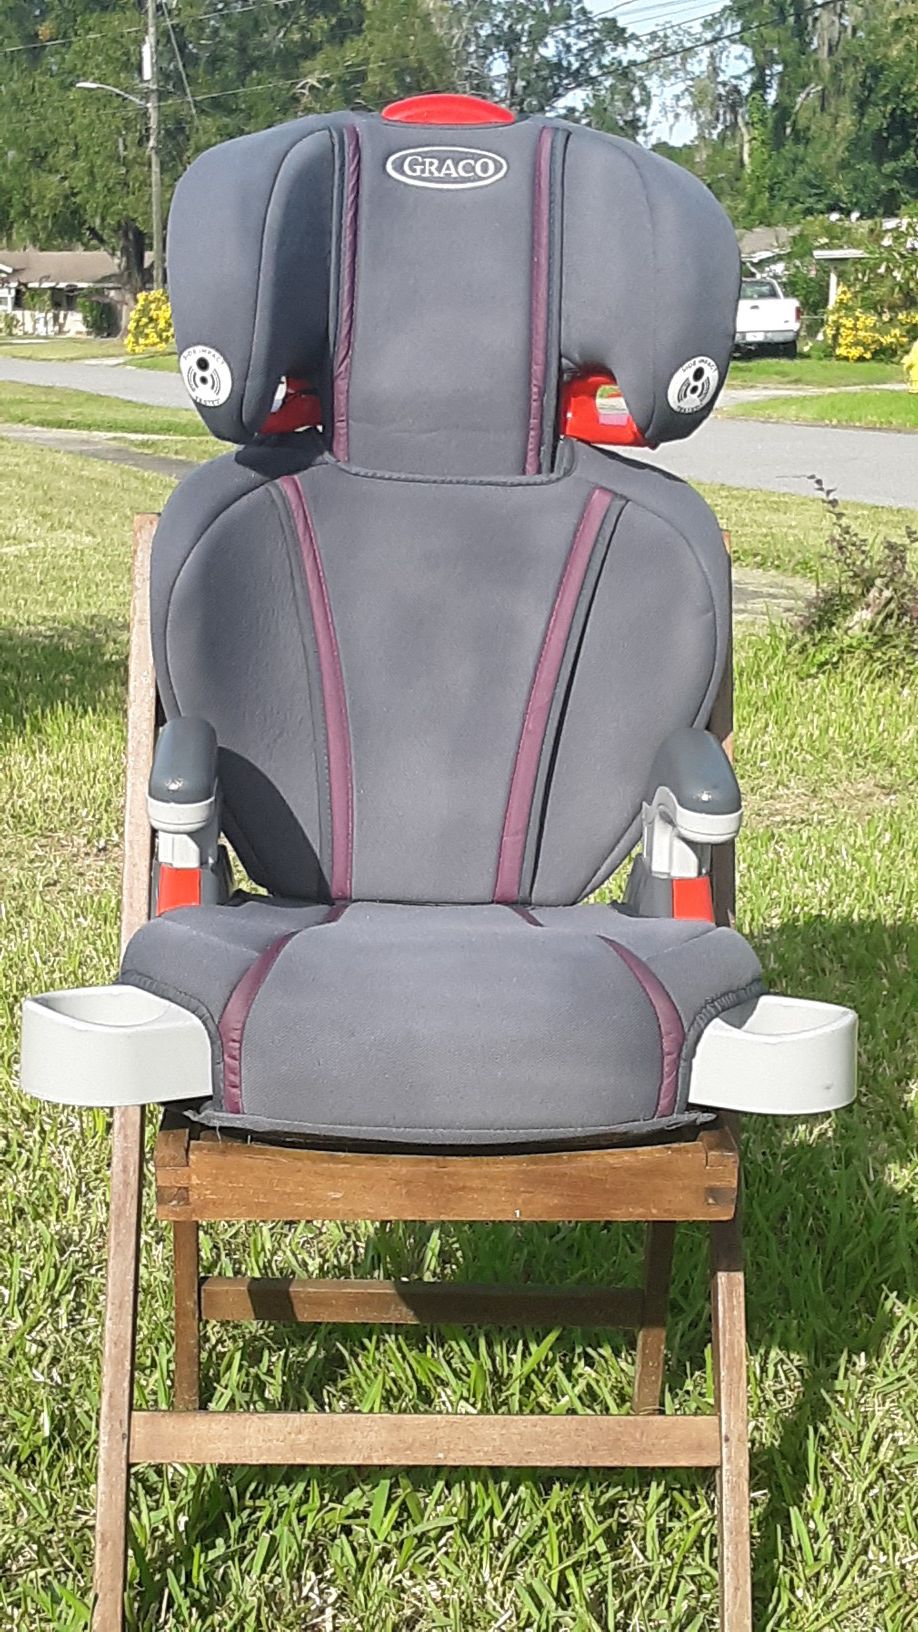 Graco Turbobooster Car Seat